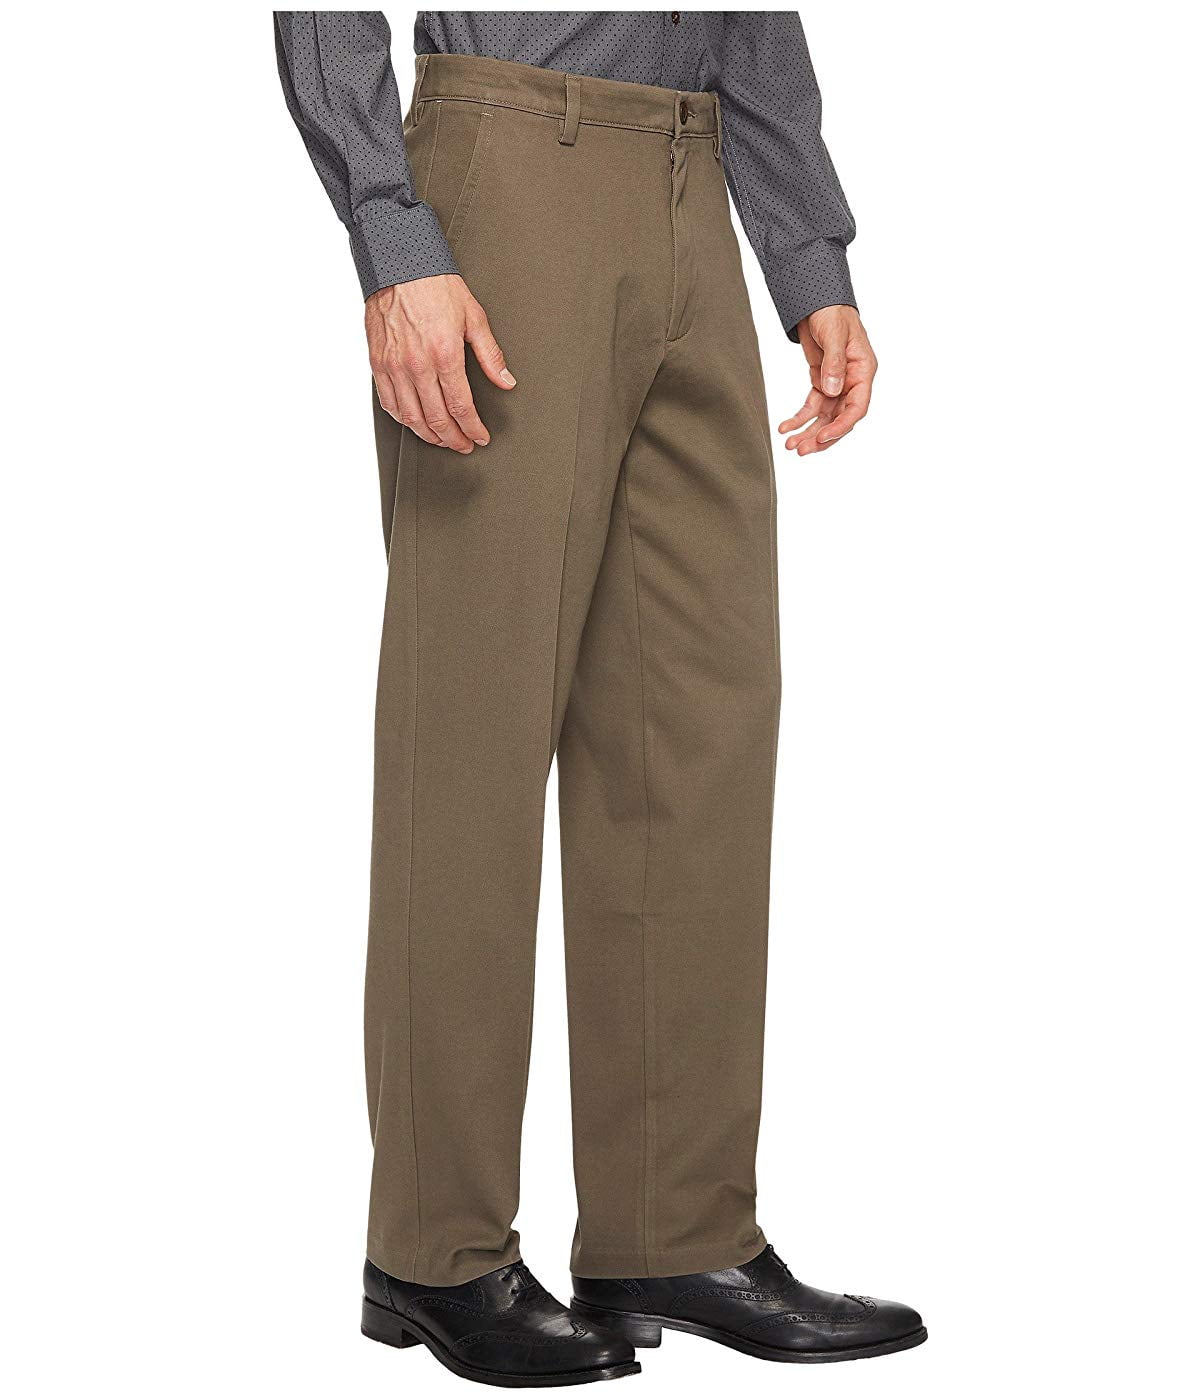 Dockers Mens Big & Tall Classic Fit Flat Front Broken-In Washed Khaki Pants 